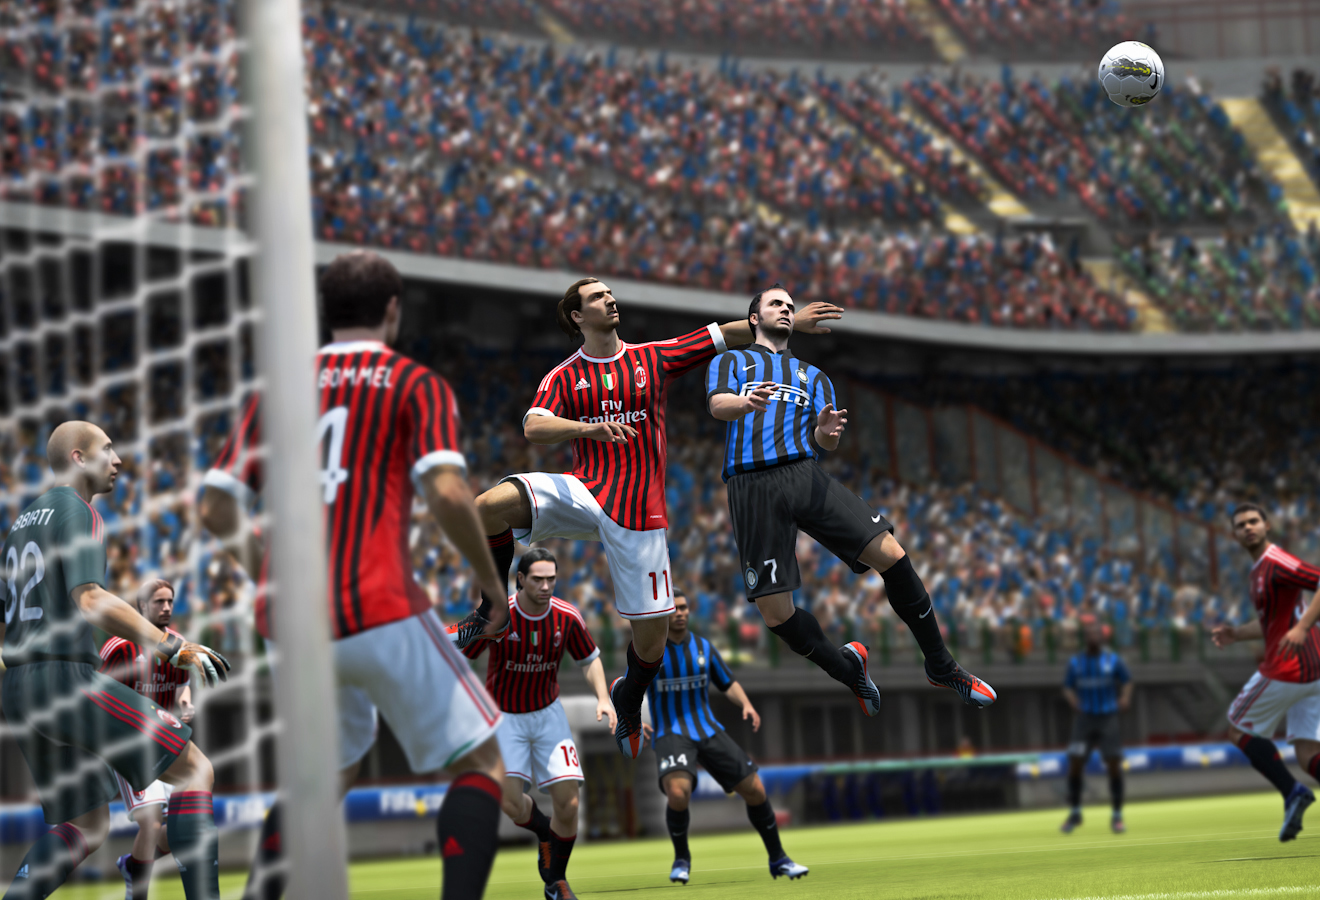 Pazzini rises highest for his header in Inter v AC Milan derby